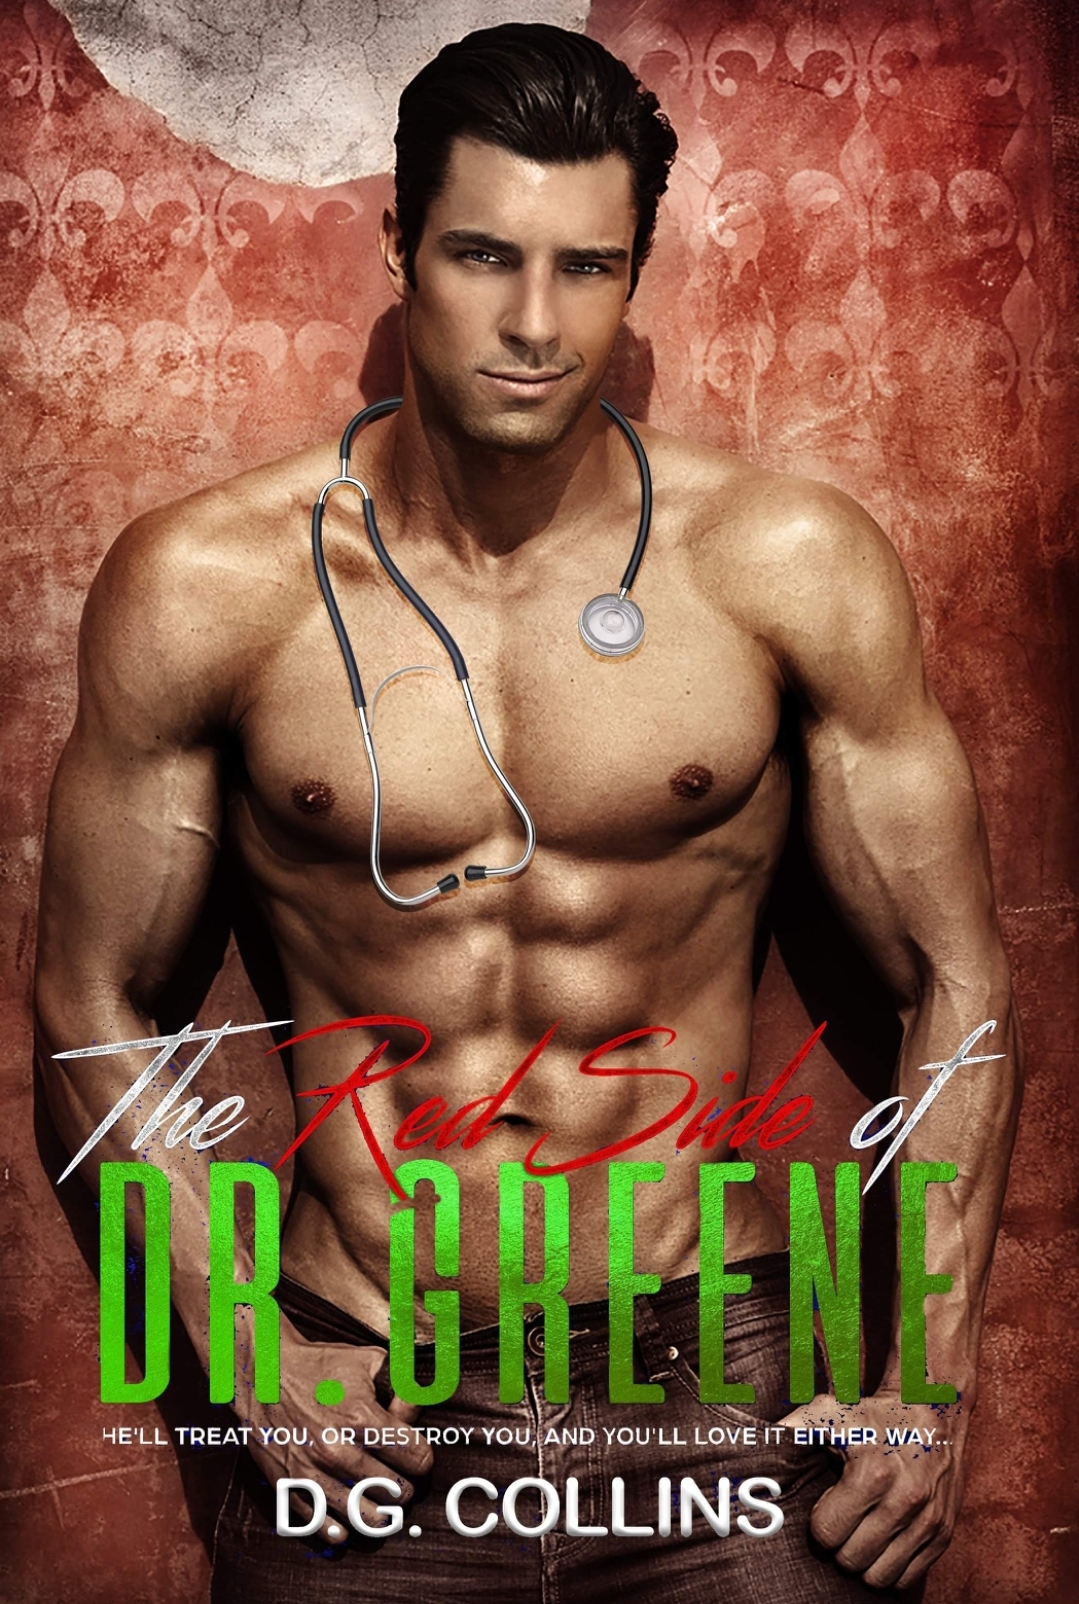 The Red Side of Dr. Greene: He'll treat you, or destroy you, and you'll love it either way